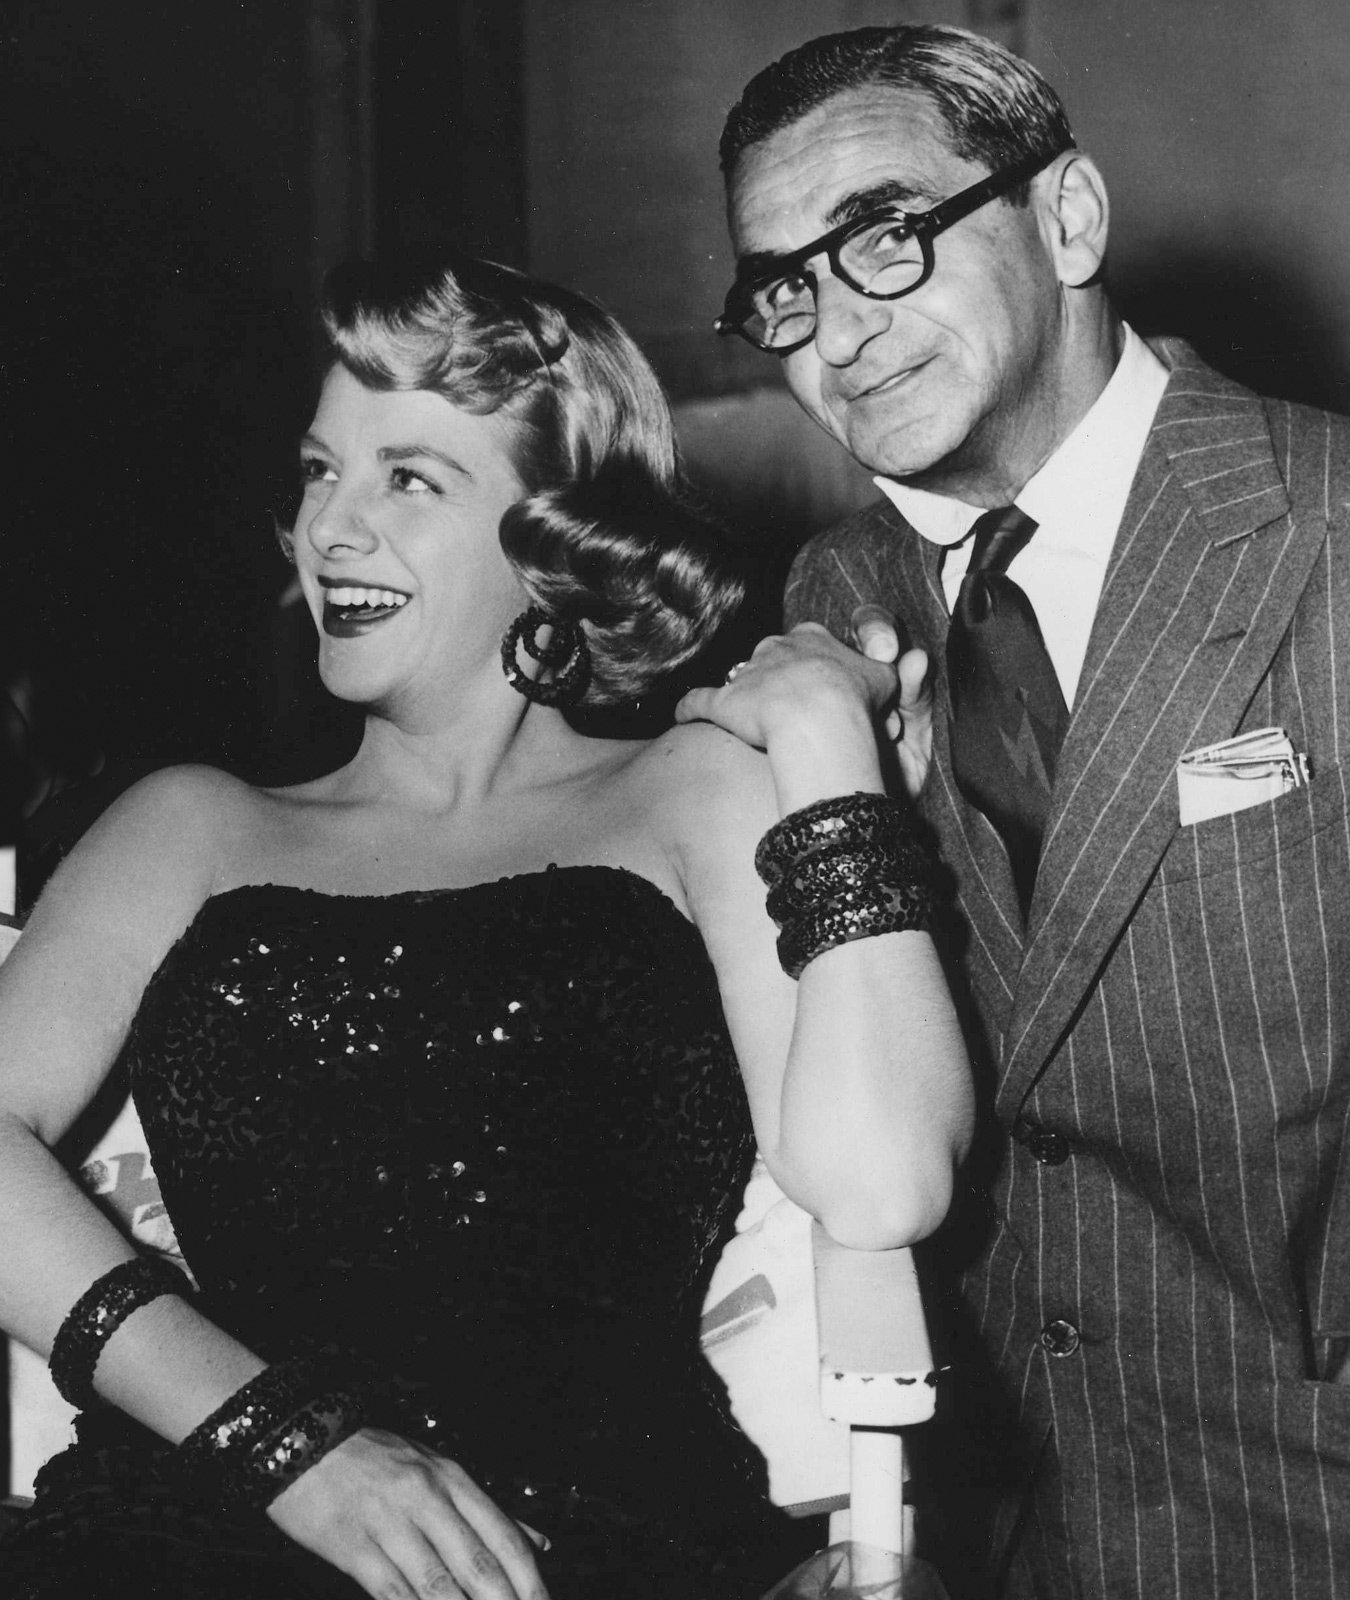 Irving Berlin and Rosemary Clooney